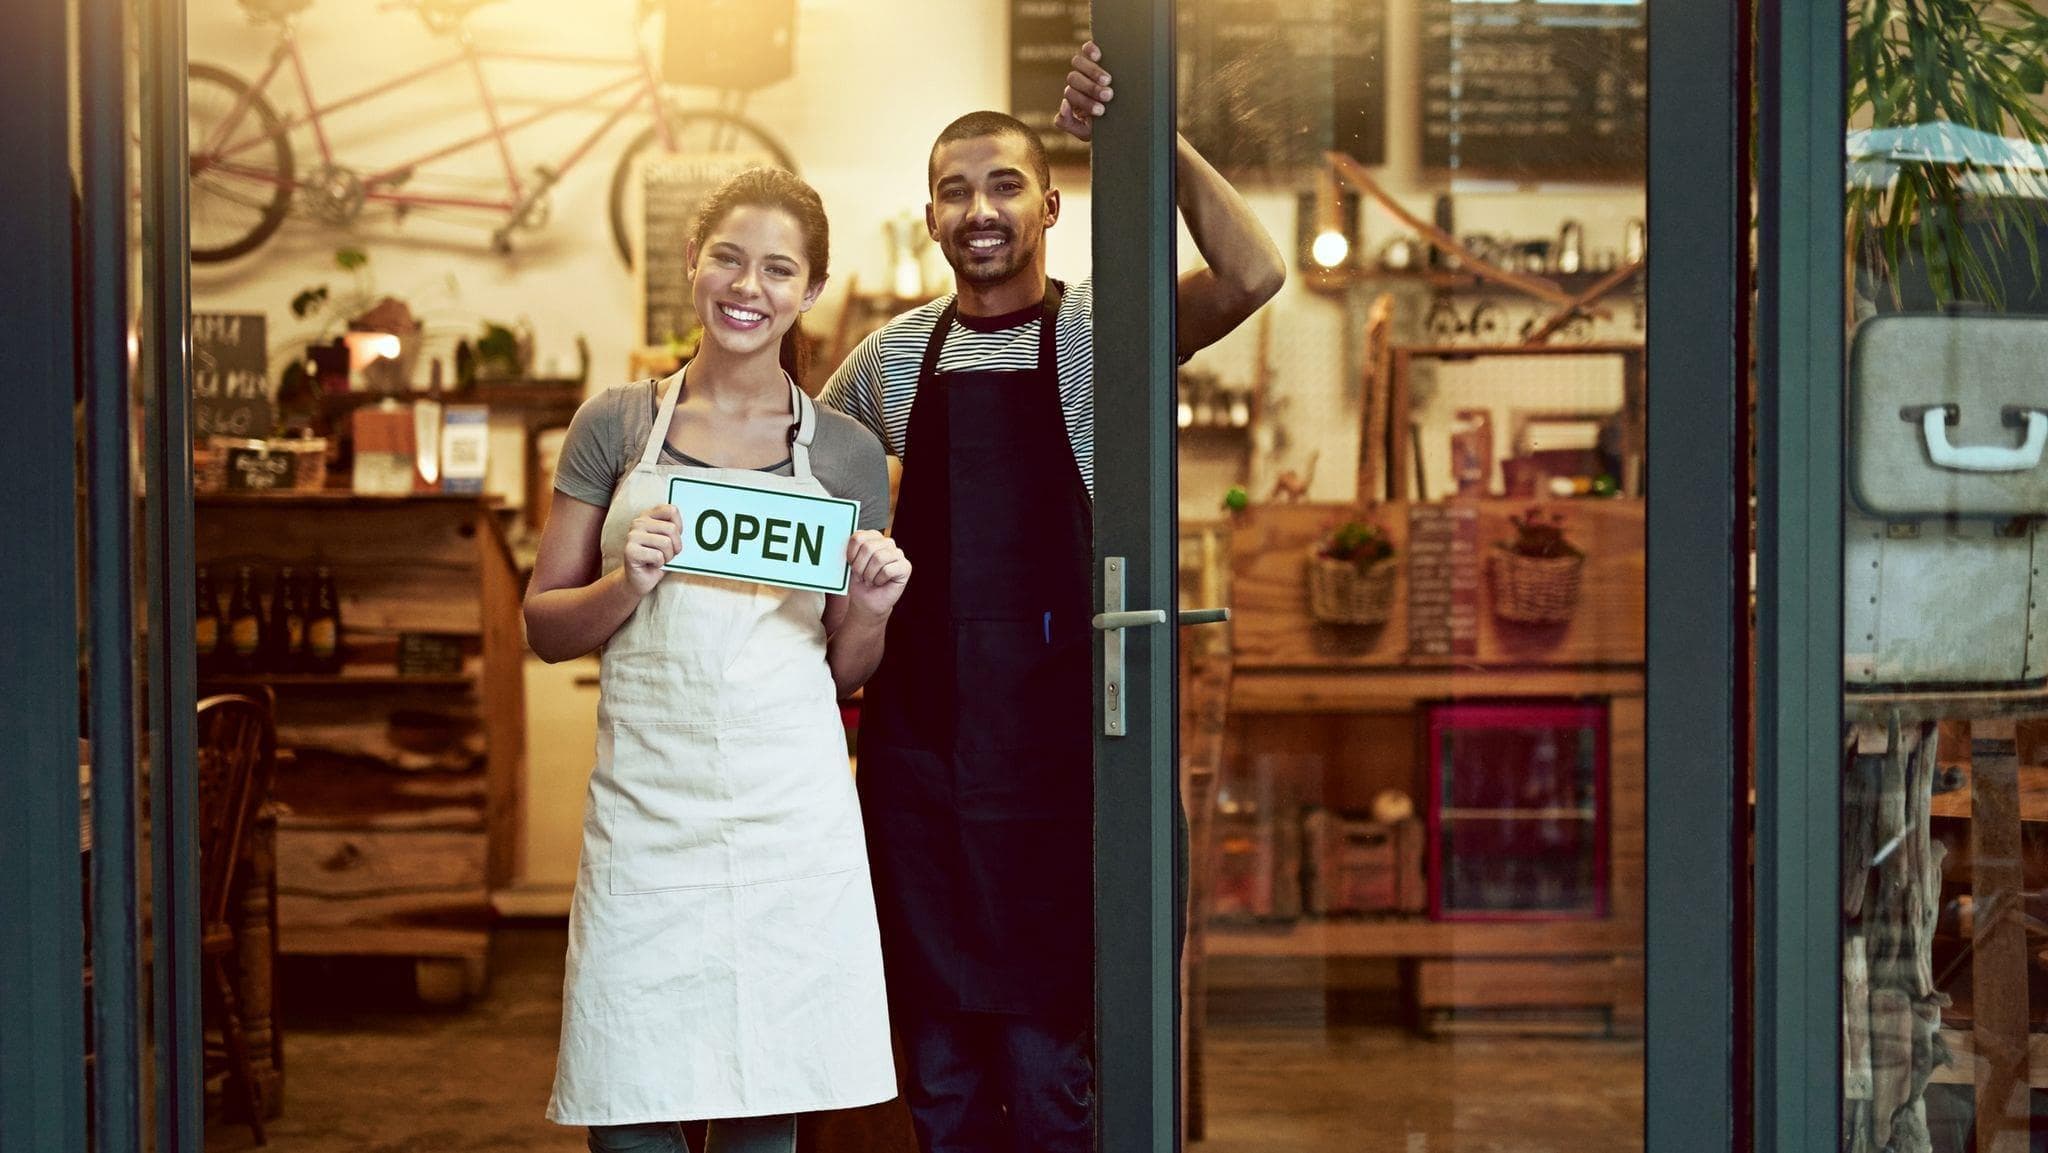 entrepreneurial couple standing in doorway to their shop holding an open sign